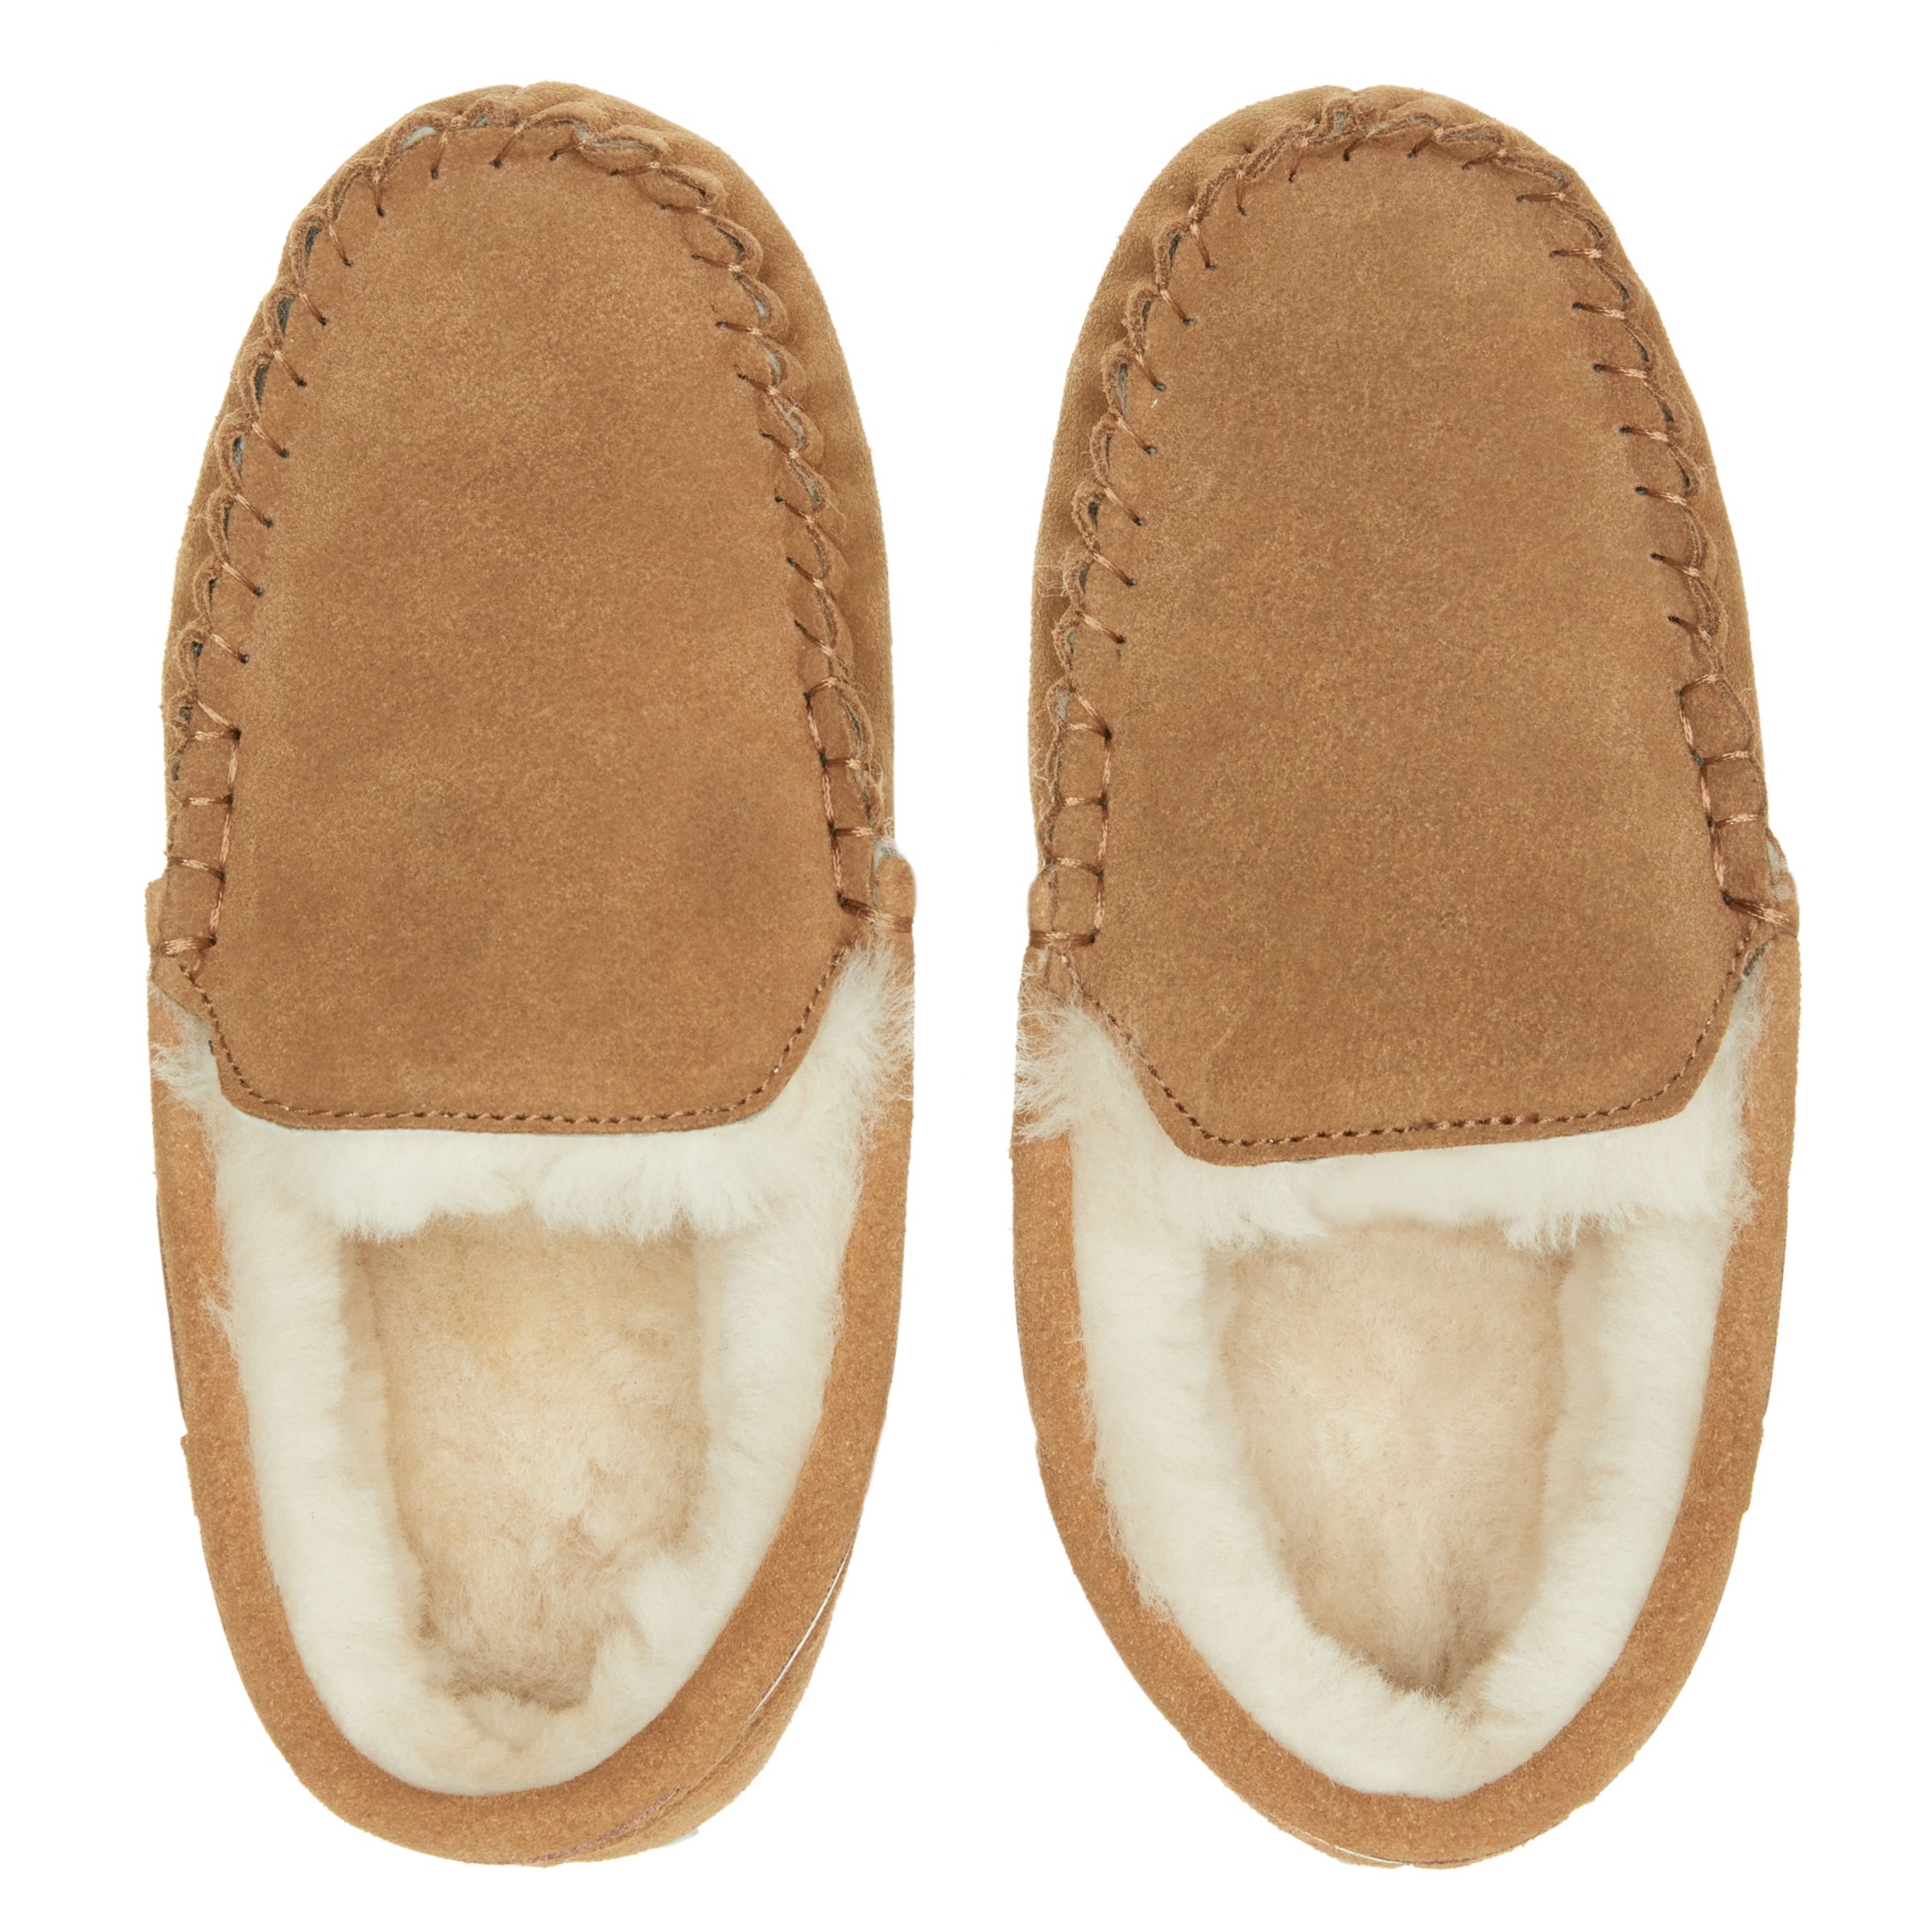 boys moccasin slippers